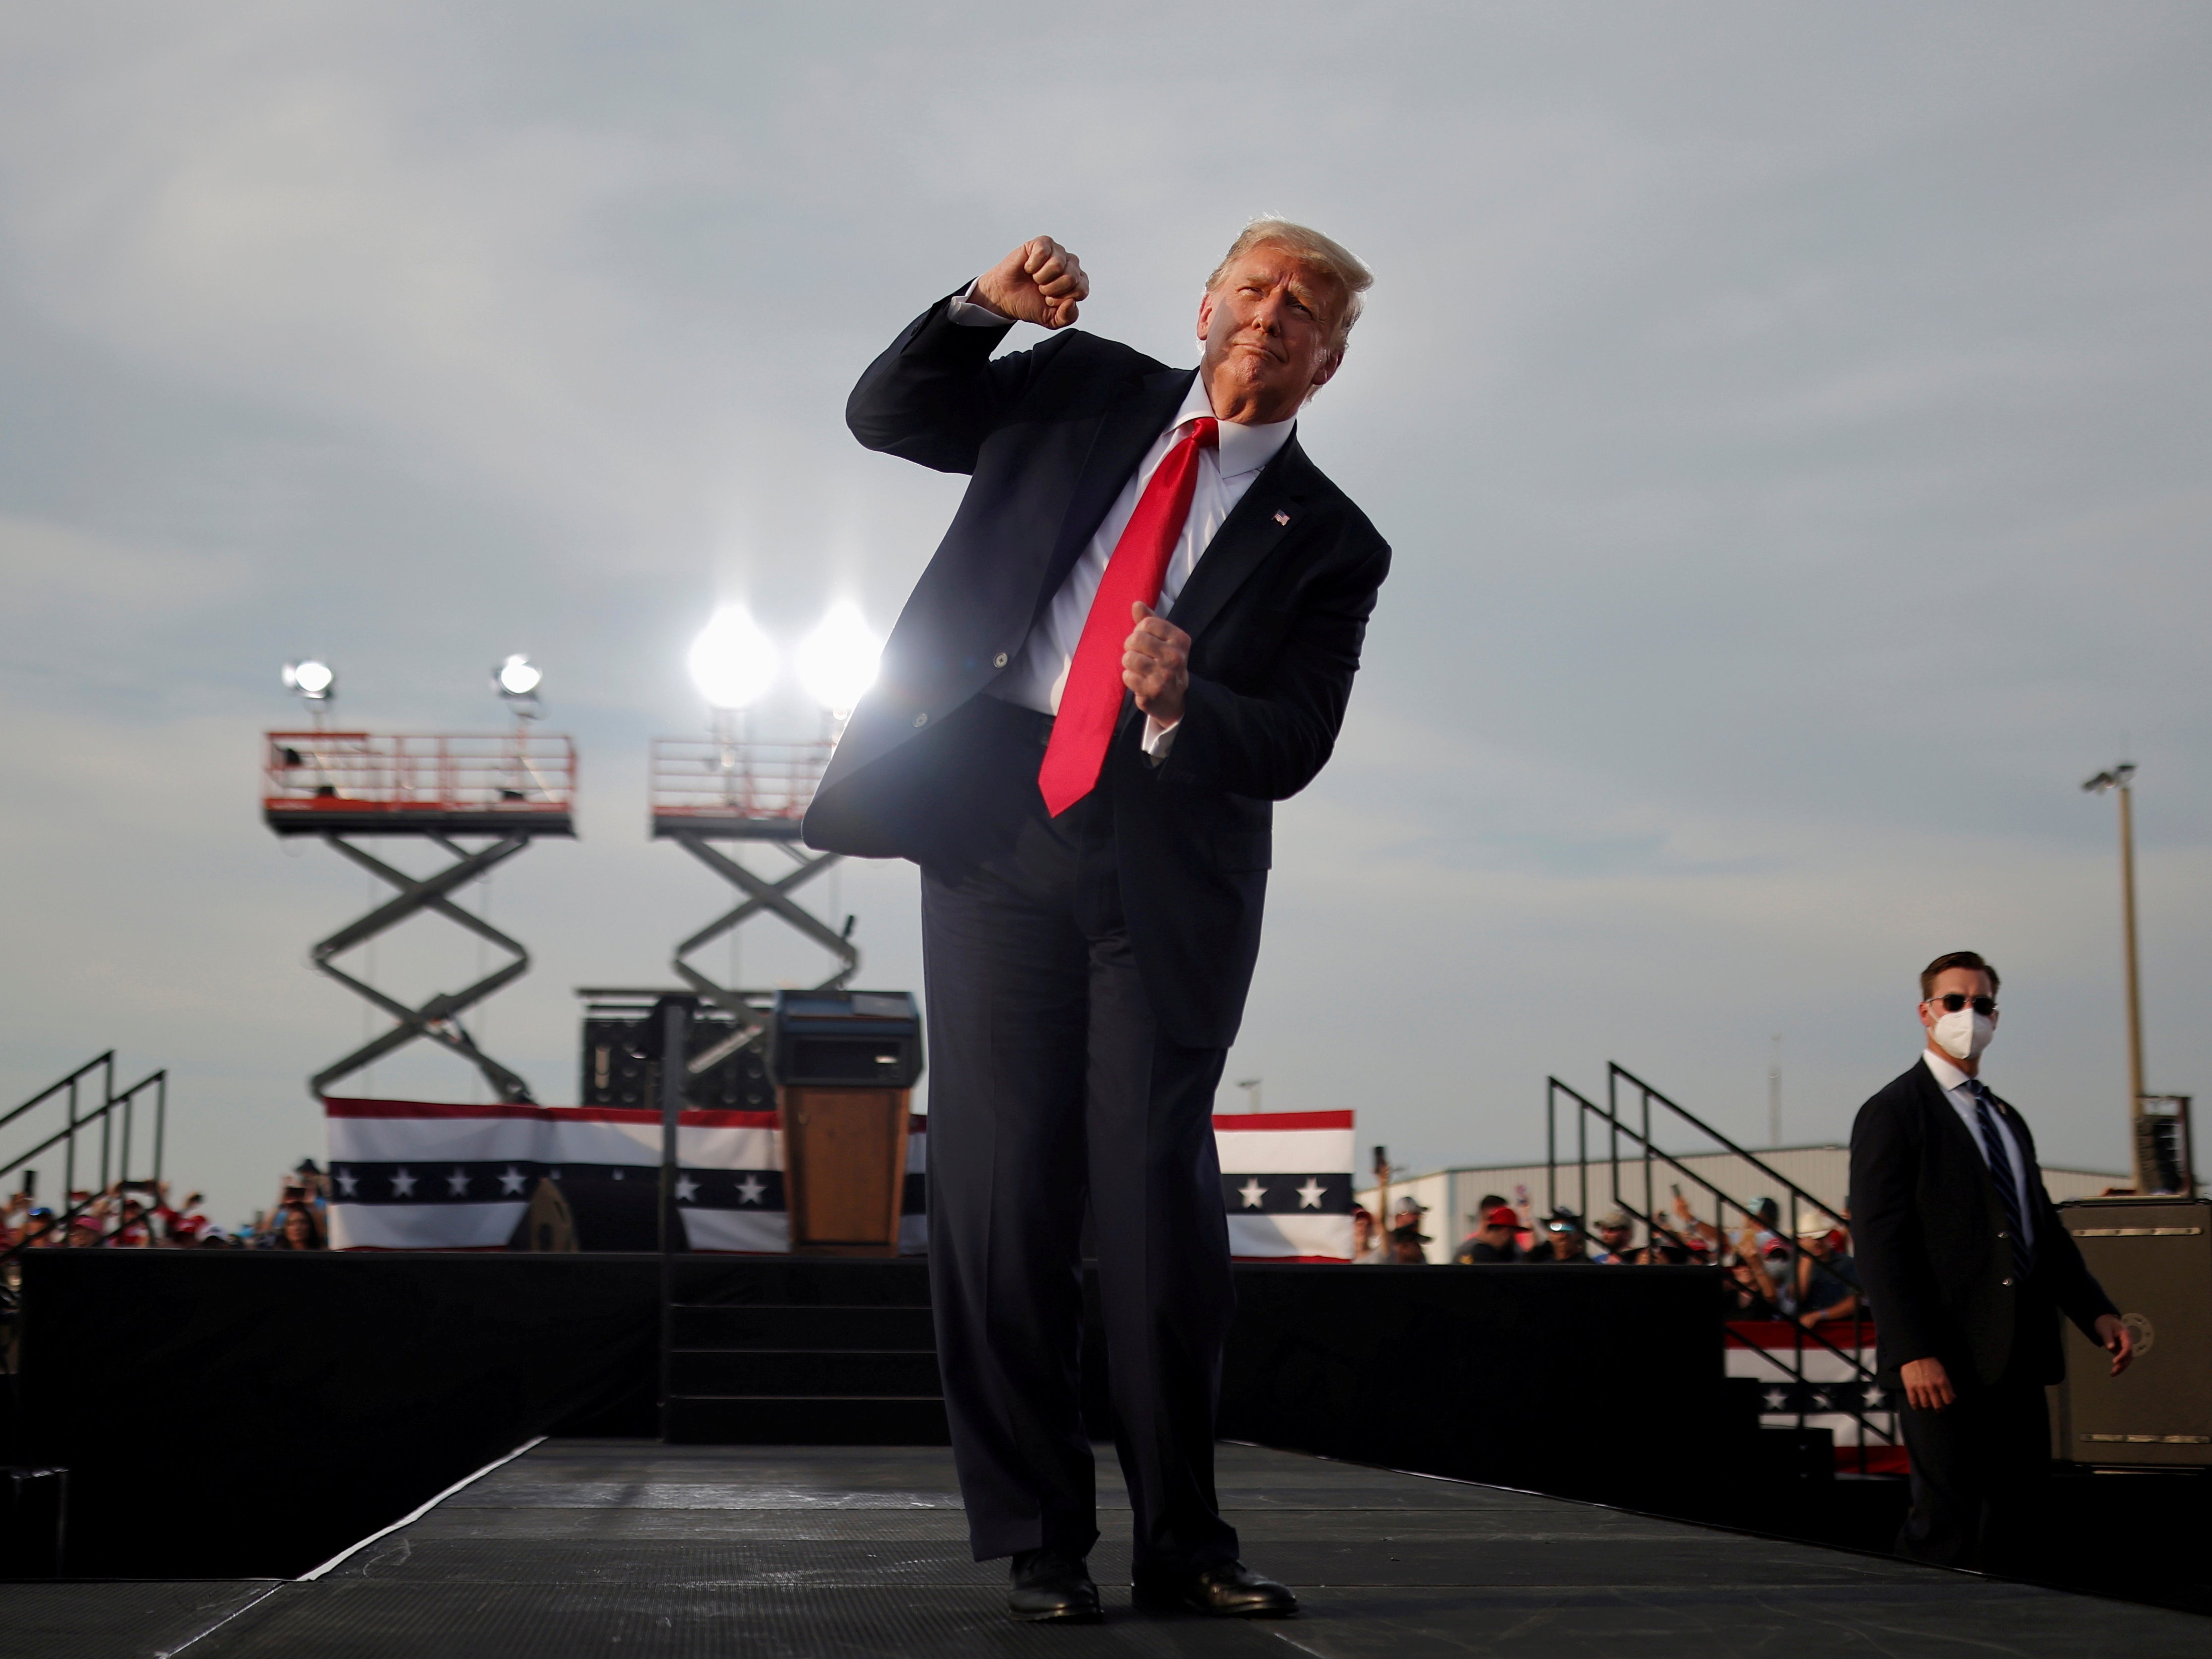 Former US president Donald Trump danced during a rally in Ocala, Florida, on 16 October 2020